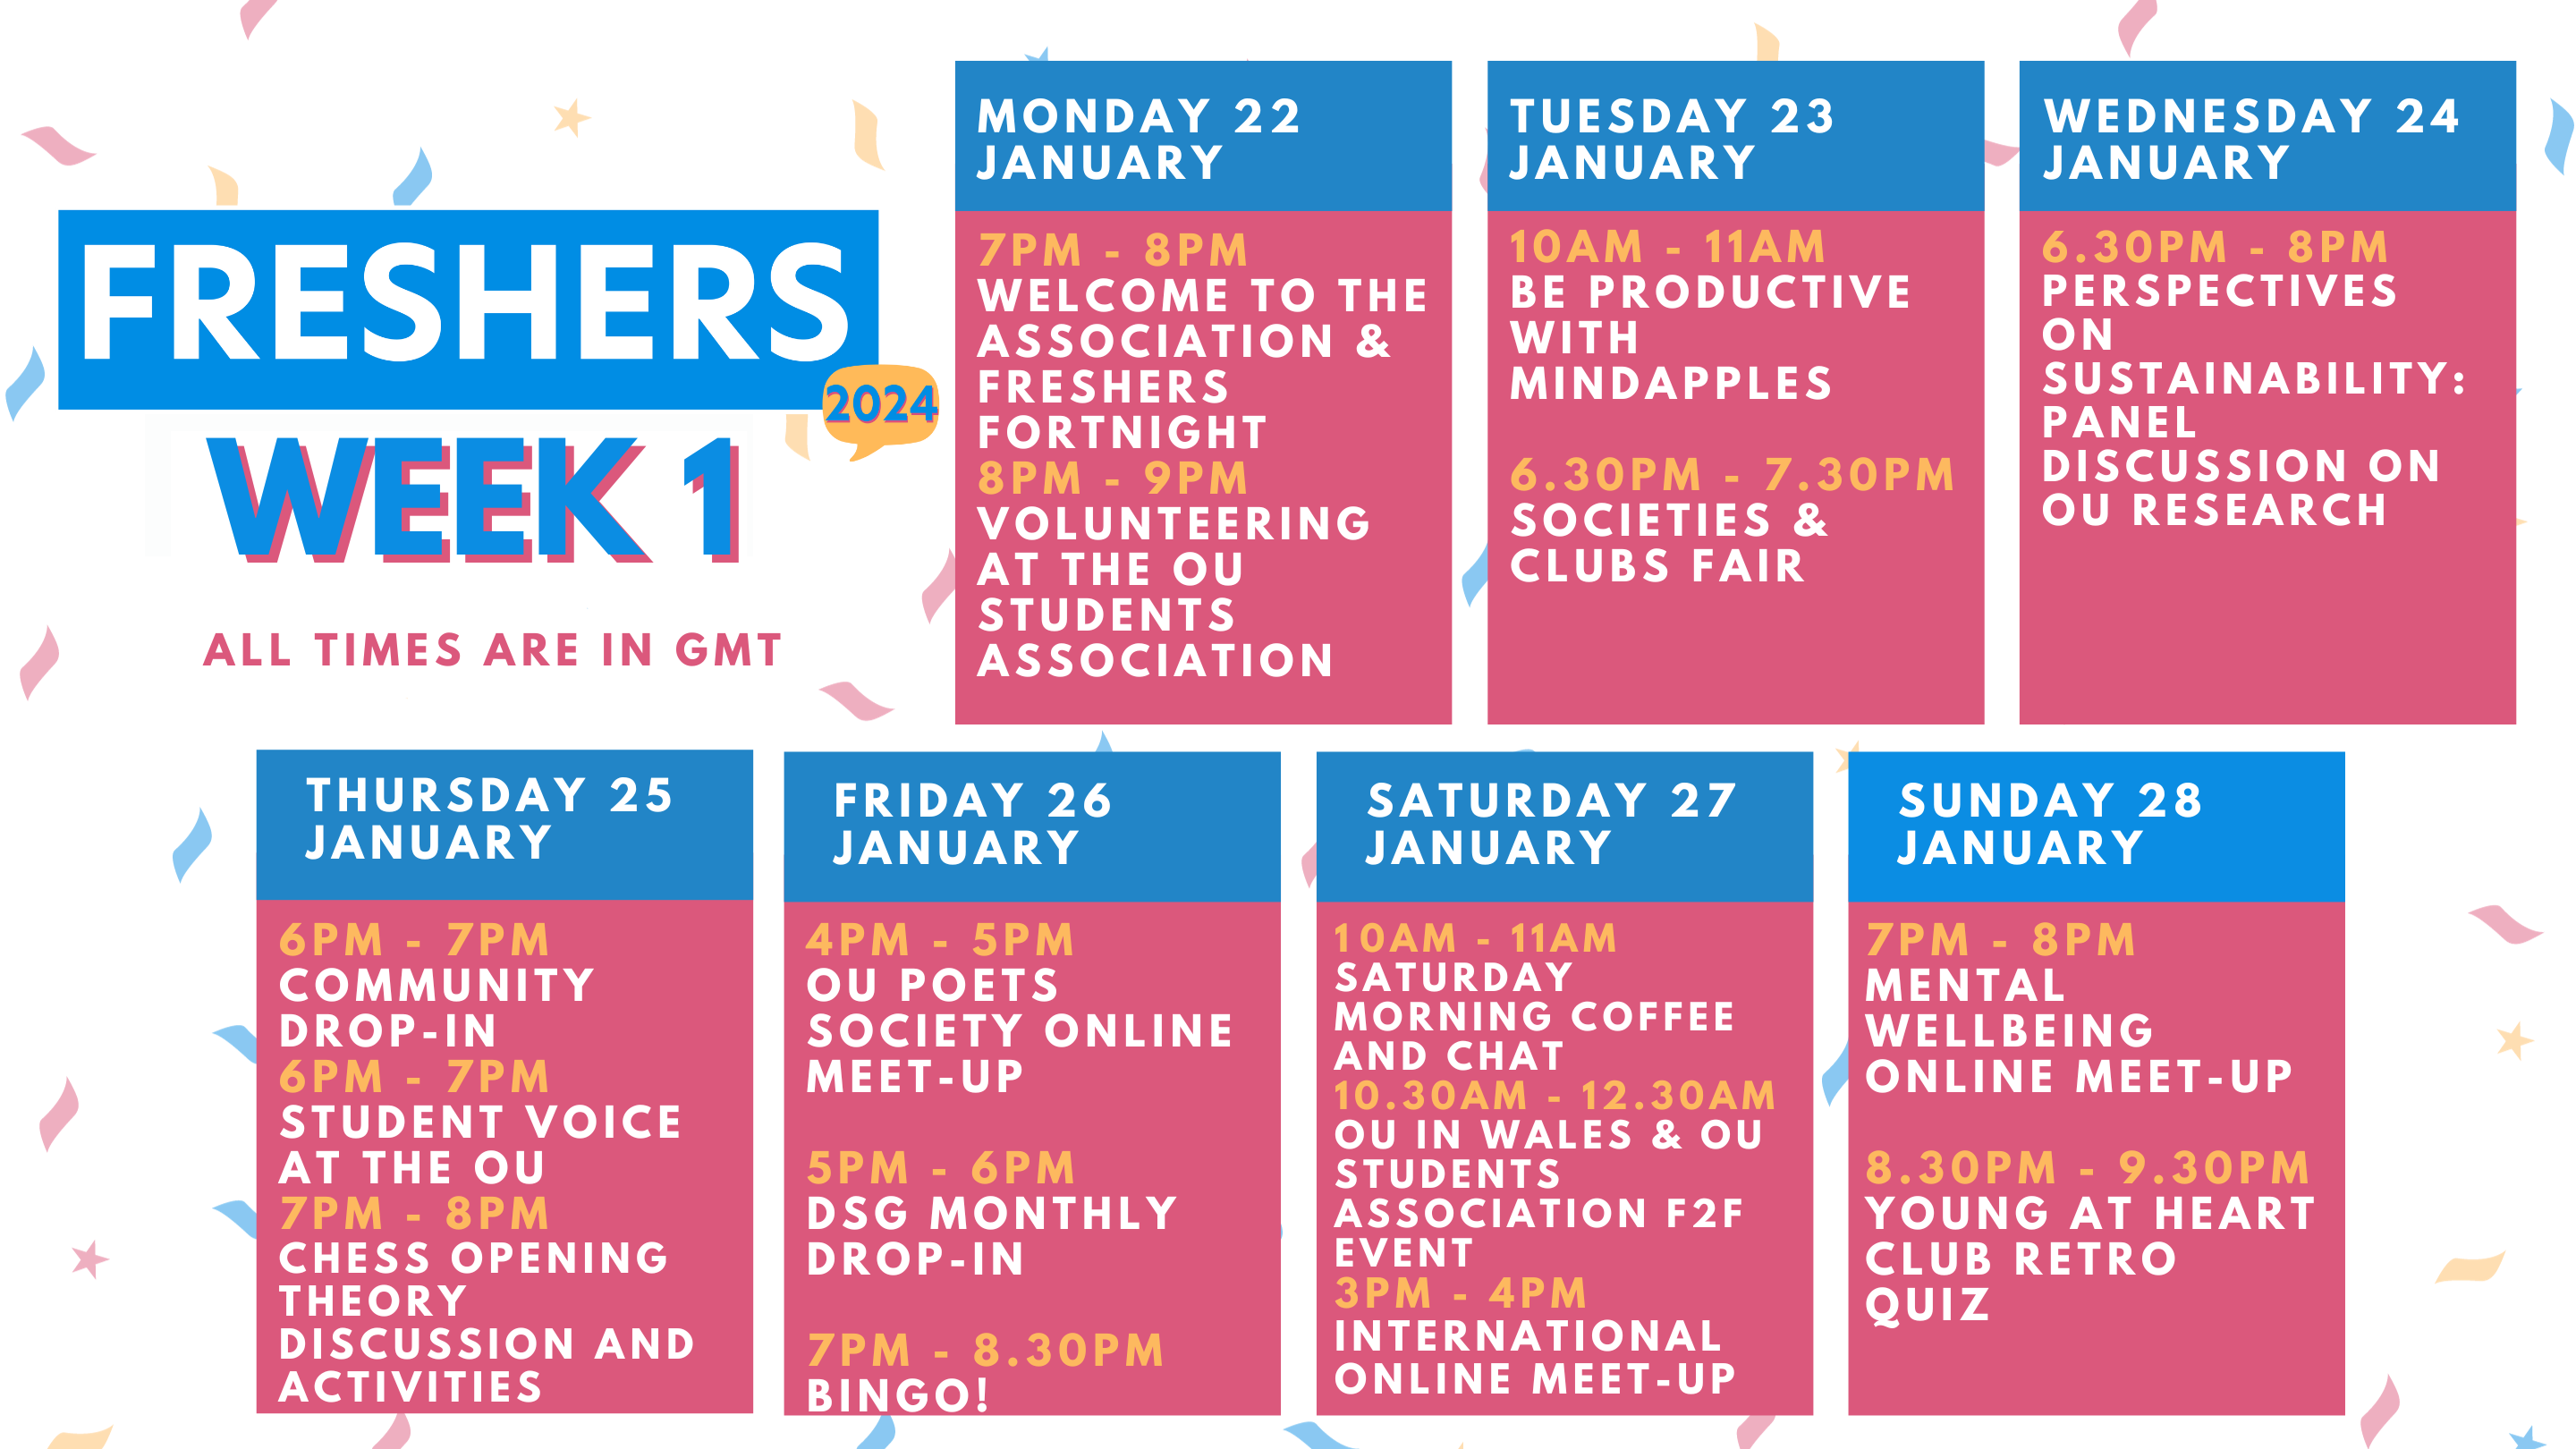 Image shows the Freshers week programme.